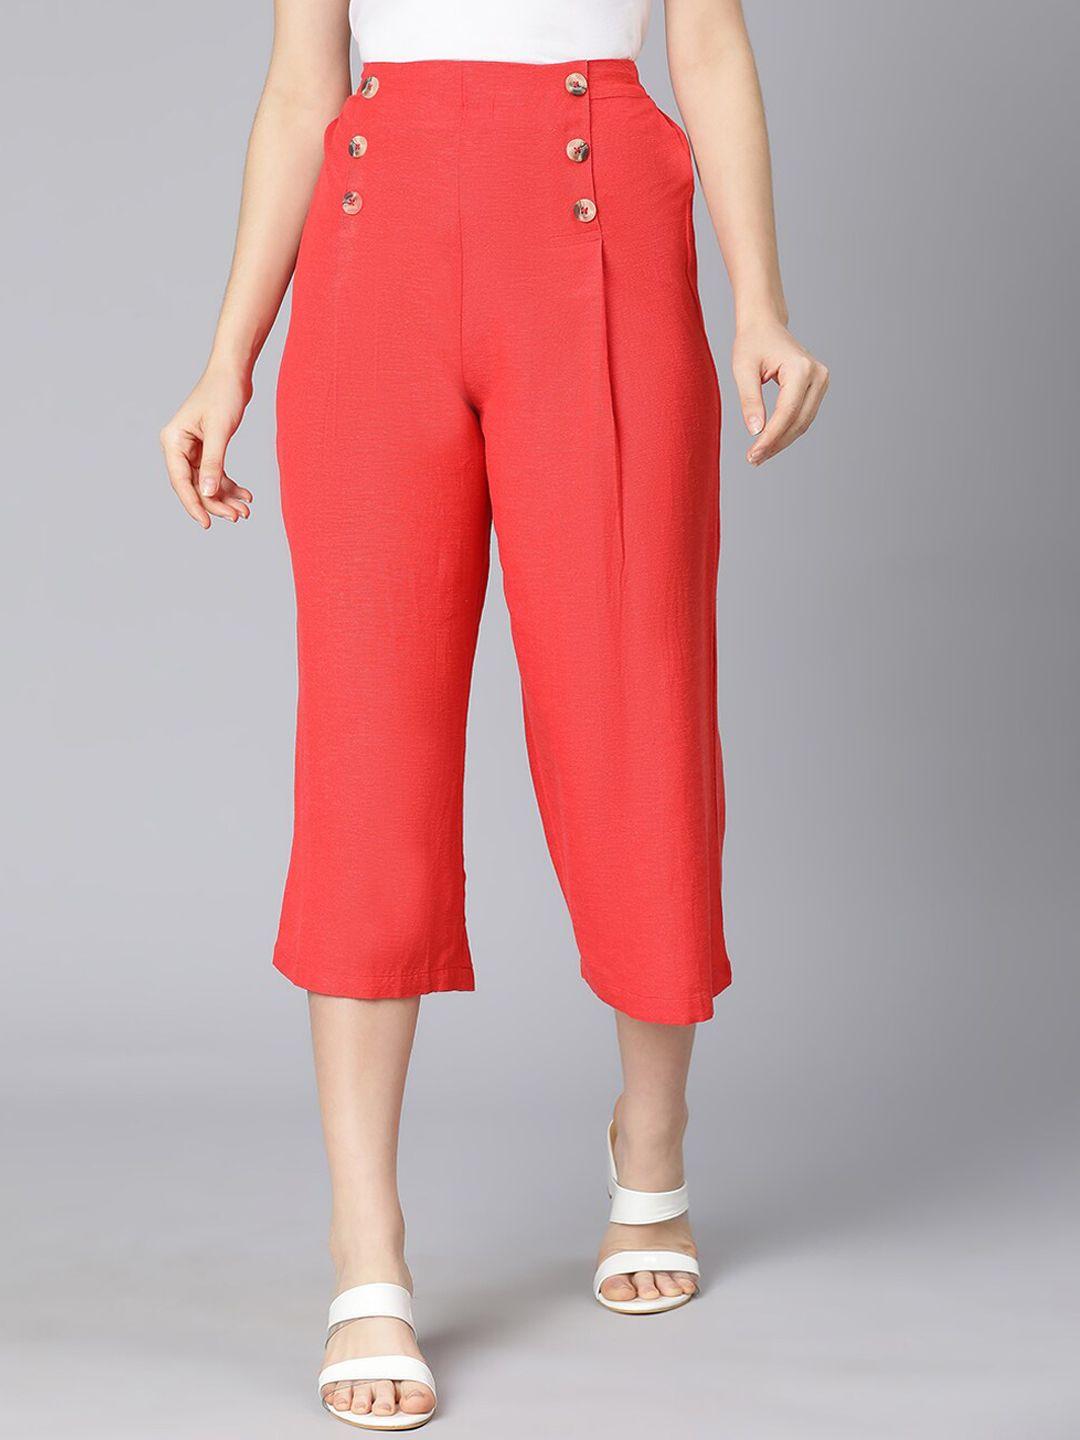 oxolloxo women coral solid three fourth culottes trousers